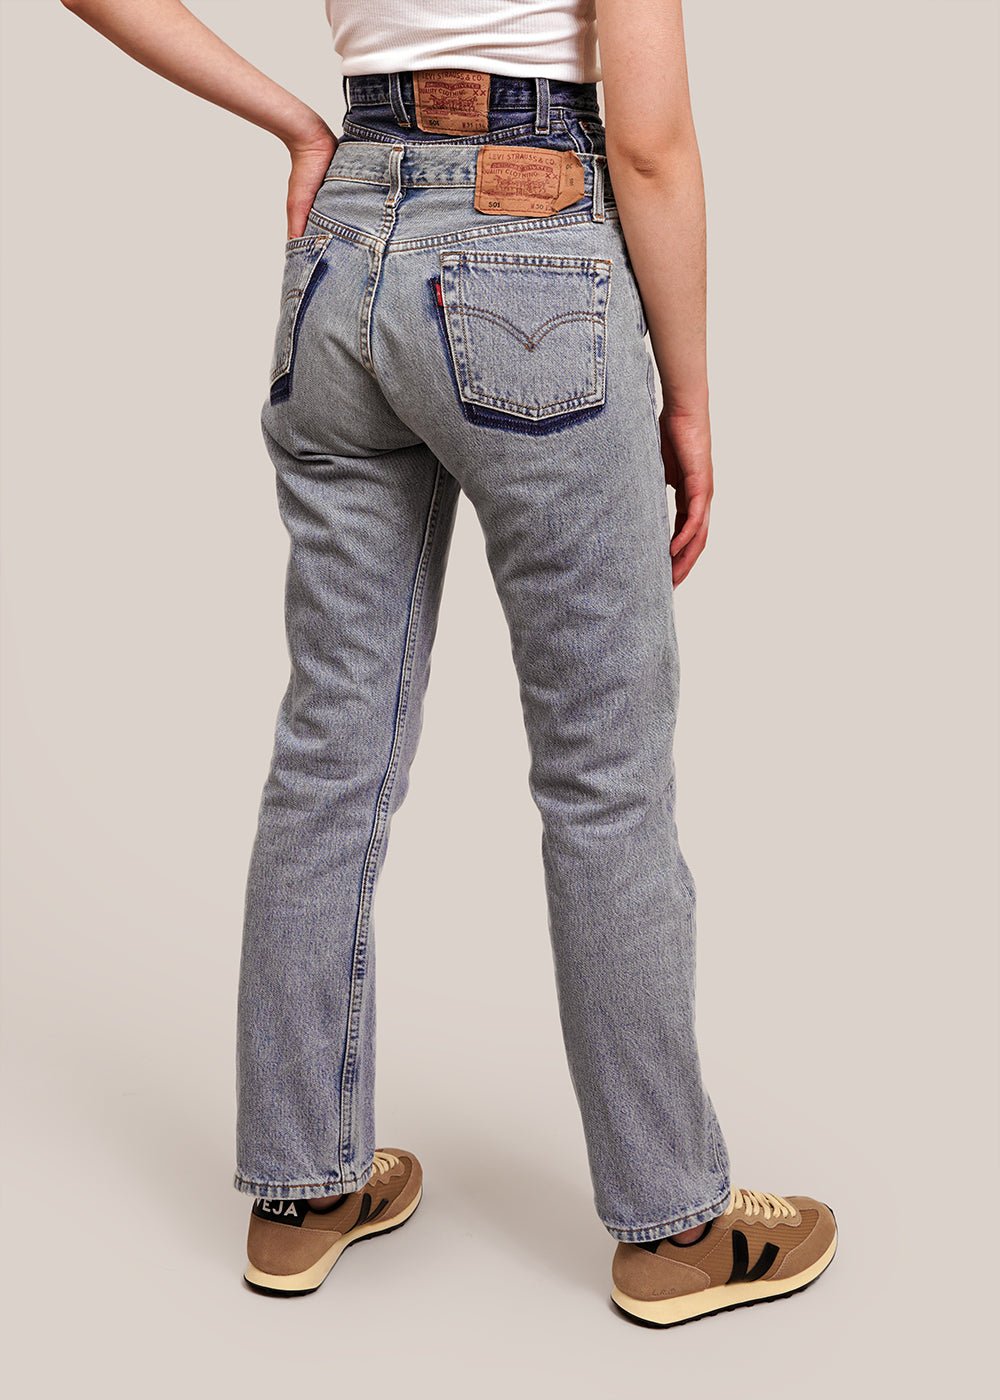 https://newclassics.ca/cdn/shop/products/paris-re-made-vintage-double-waist-jeans-new-classics-studios-sustainable-and-ethical-fashion-canada-196216_1000x.jpg?v=1687282422